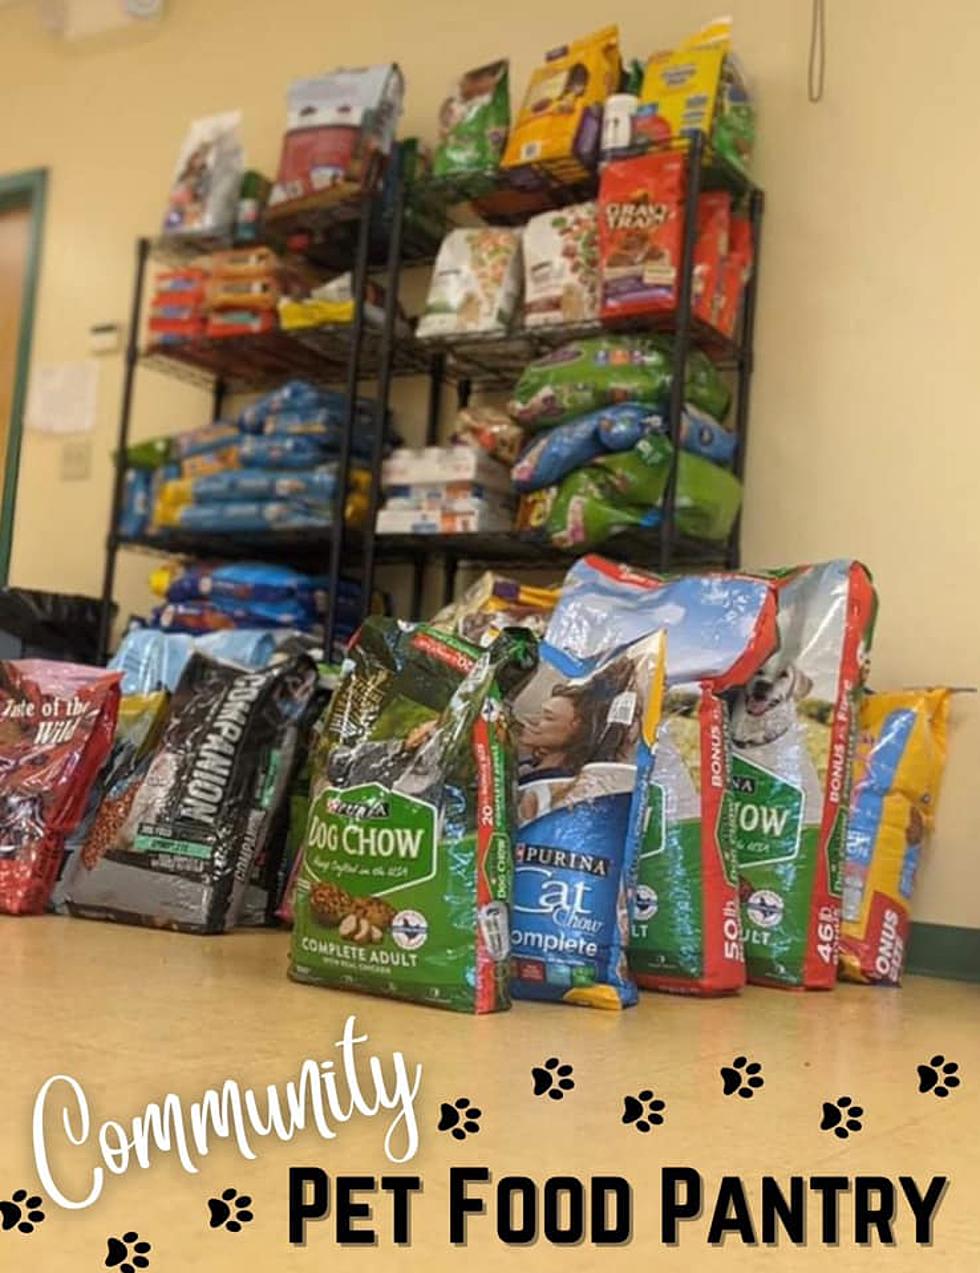 Humane Society In Waterville Created A Pet Food Pantry With Extras